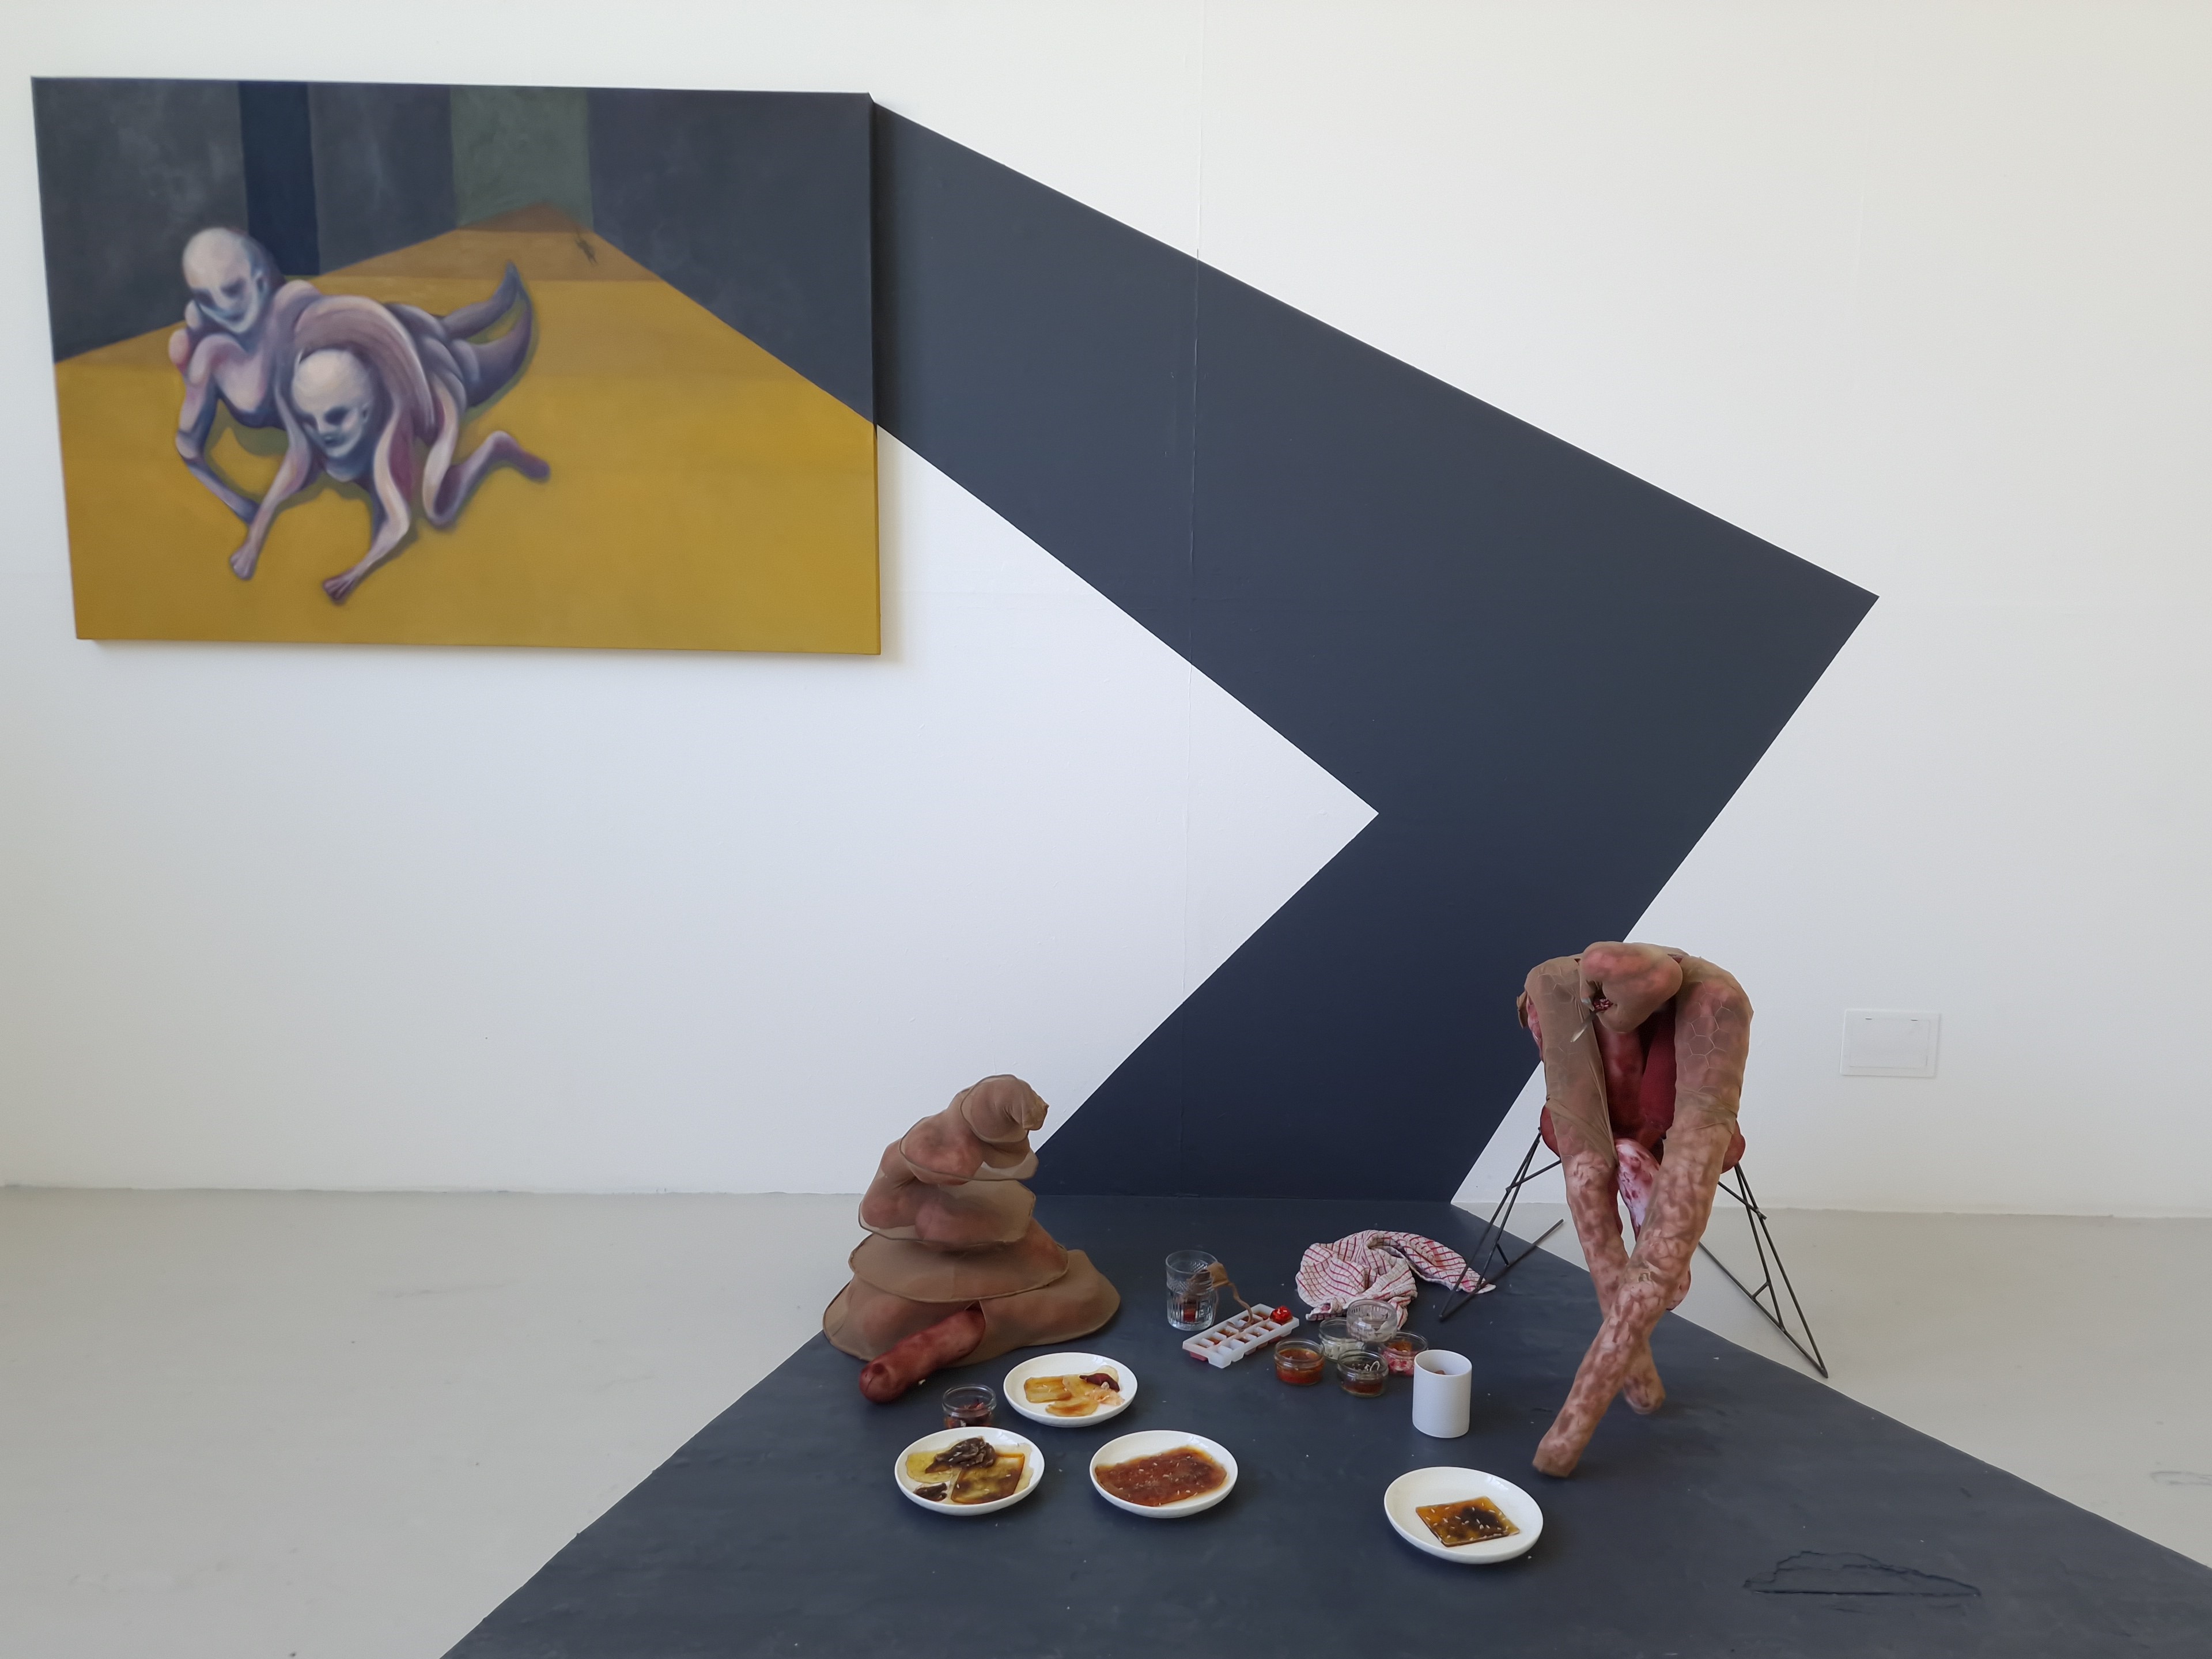 An installation by Elena Genovese depicts a painting of two figures and an animal travelling through a corridor and multiple sculptures on the floor. A grey stripe connects the painting and the picnic.